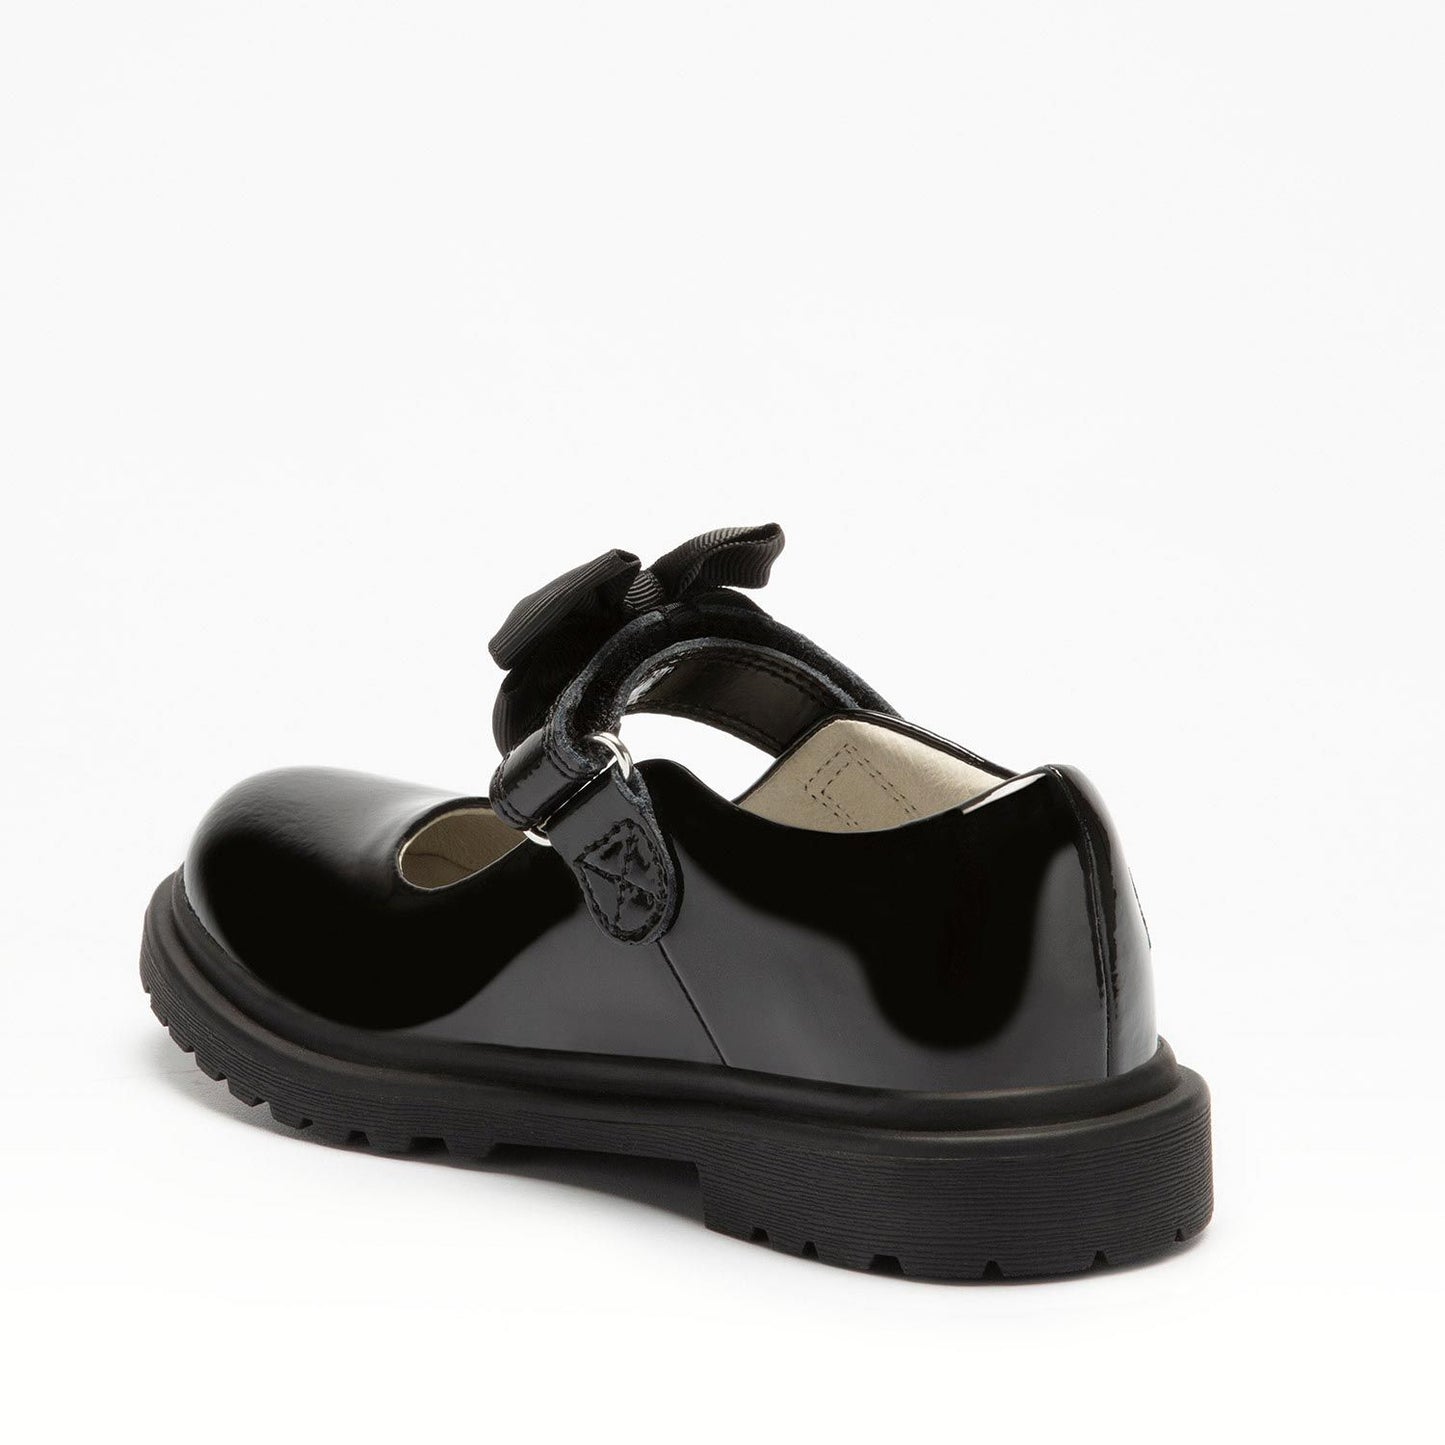 A girls chunky Mary Jane school shoe by Lelli Kelly, style LK8661 Maisie, in black patent leather with velcro fastening and detachable black fabric bow. Angled view.